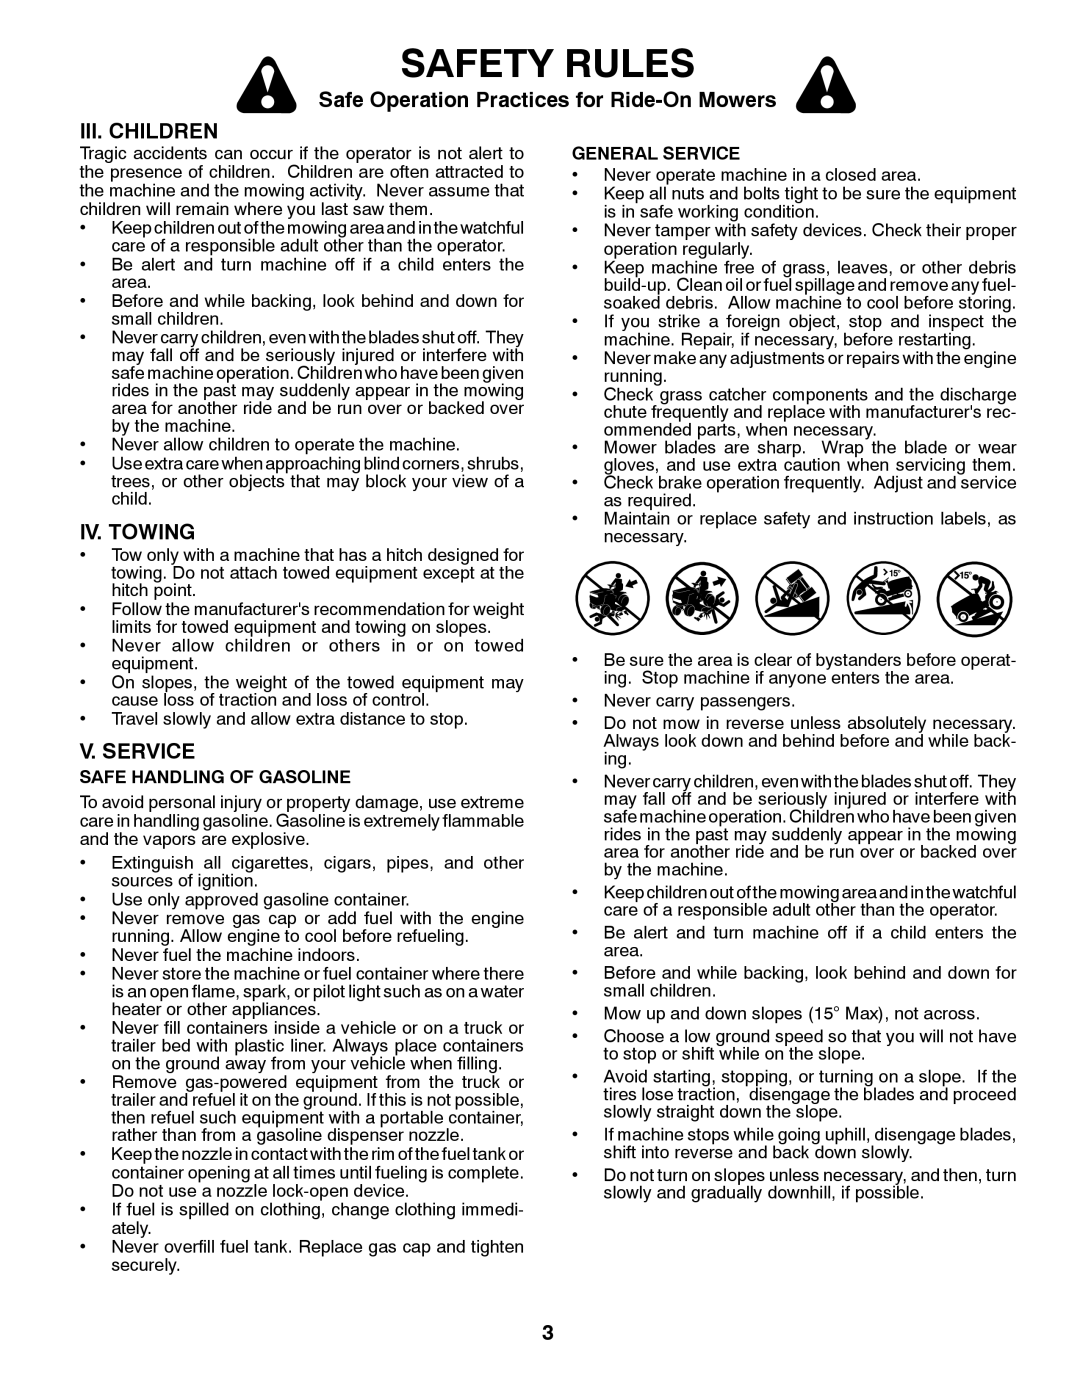 Weed Eater 435057 manual Iii. Children, Iv. Towing, V. Service, Safety Rules, Safe Operation Practices for Ride-On Mowers 